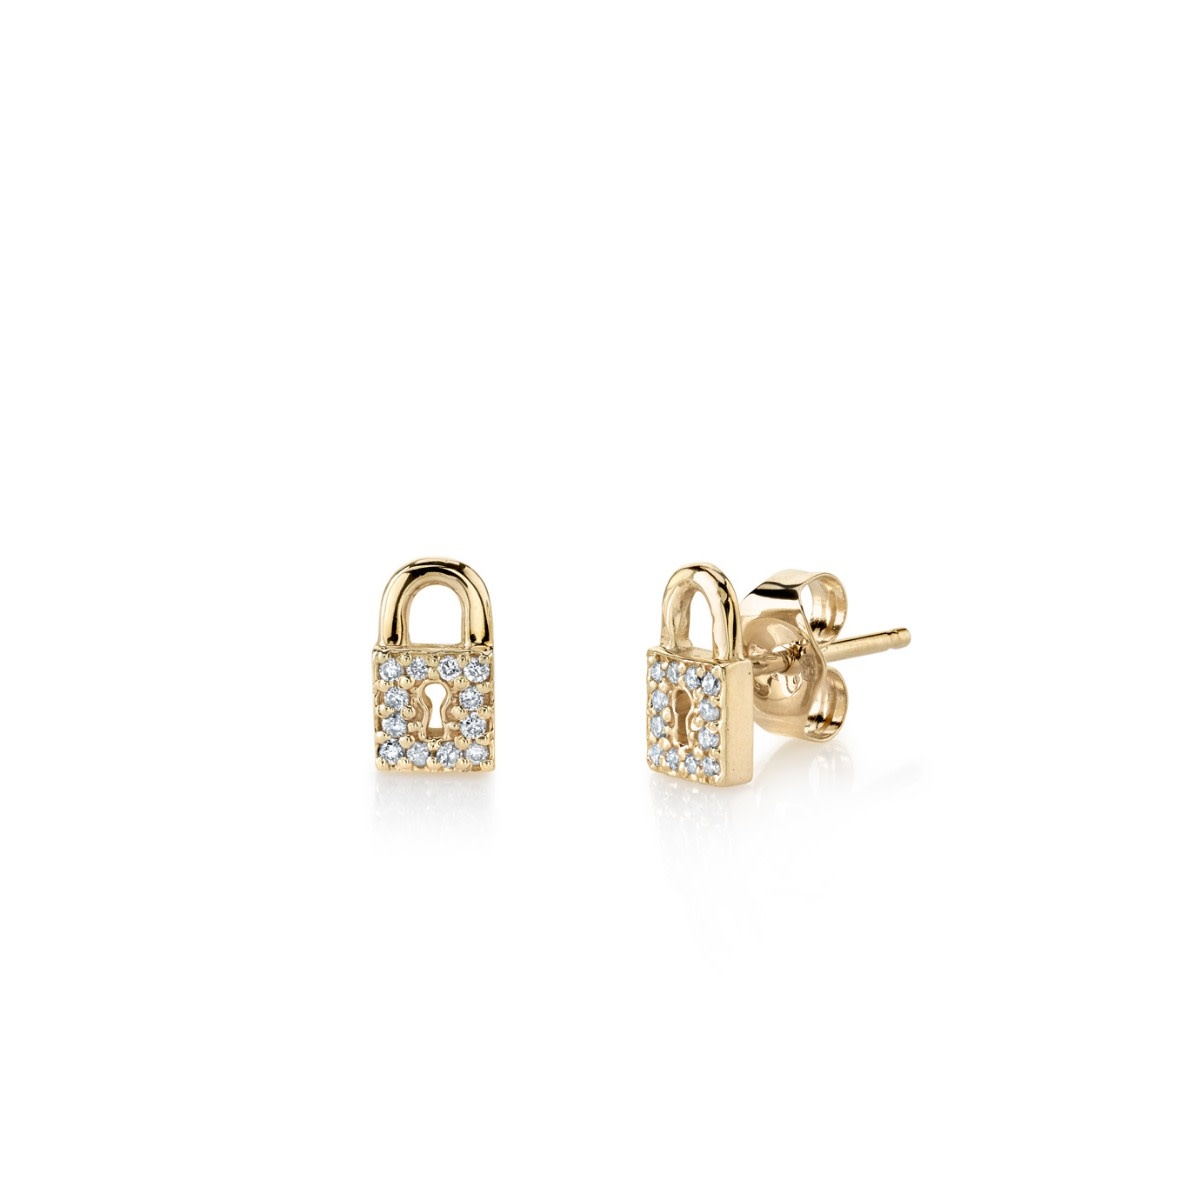 Silver Plated Odd Padlock And Key Stud Earrings – Missy Online: Shoes,  Fashion & Accessories Based in Leeds